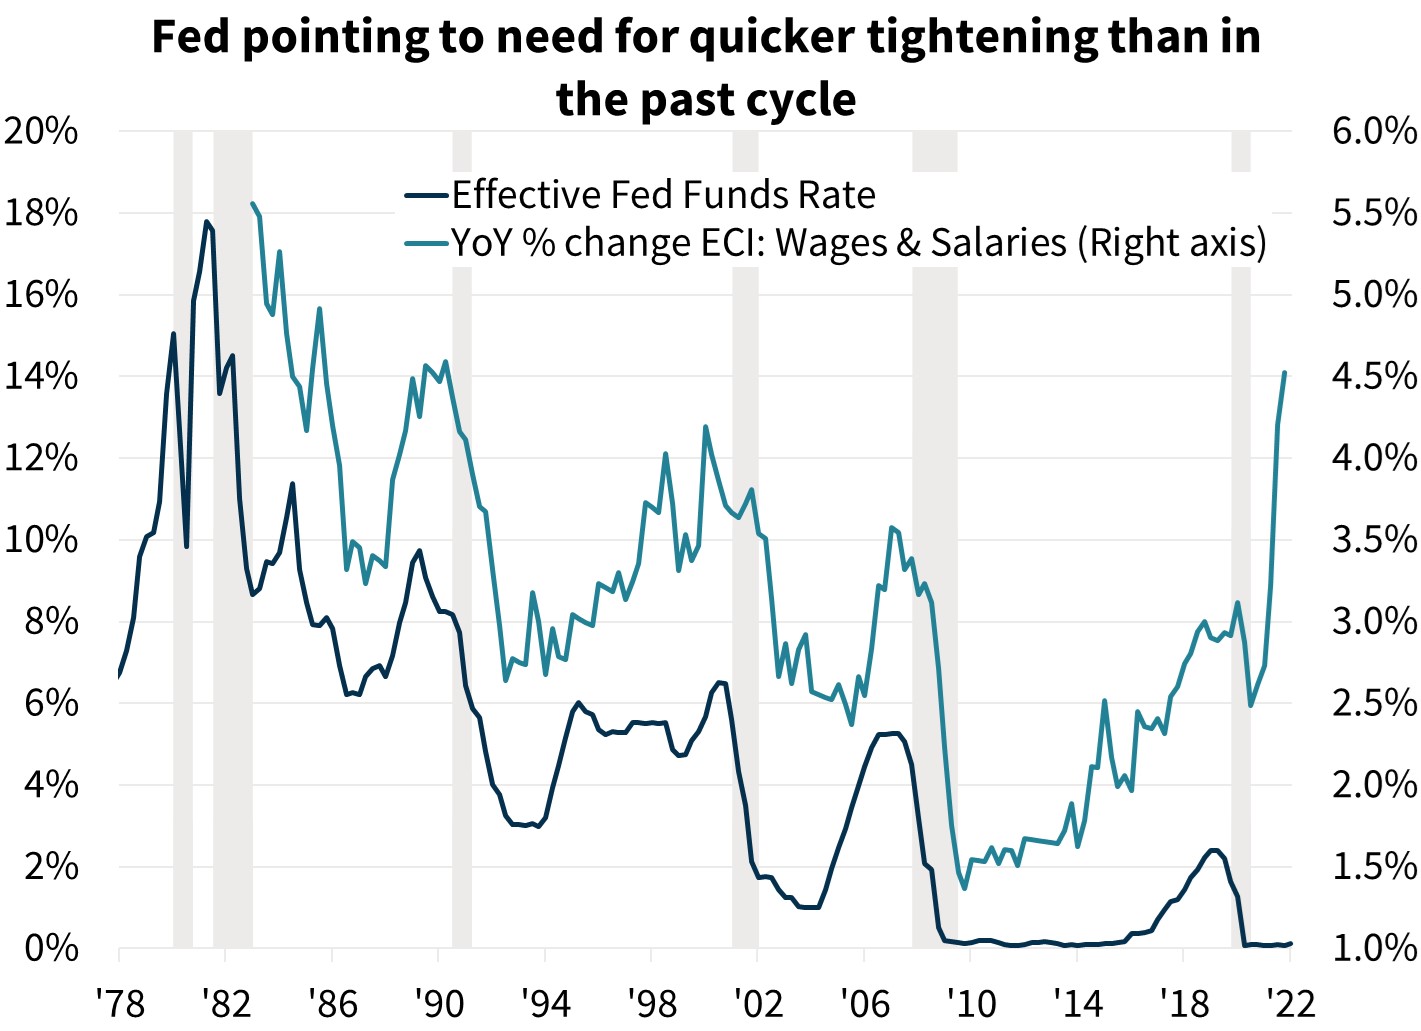  Fed pointing to need for quicker tightening than in the past cycle 